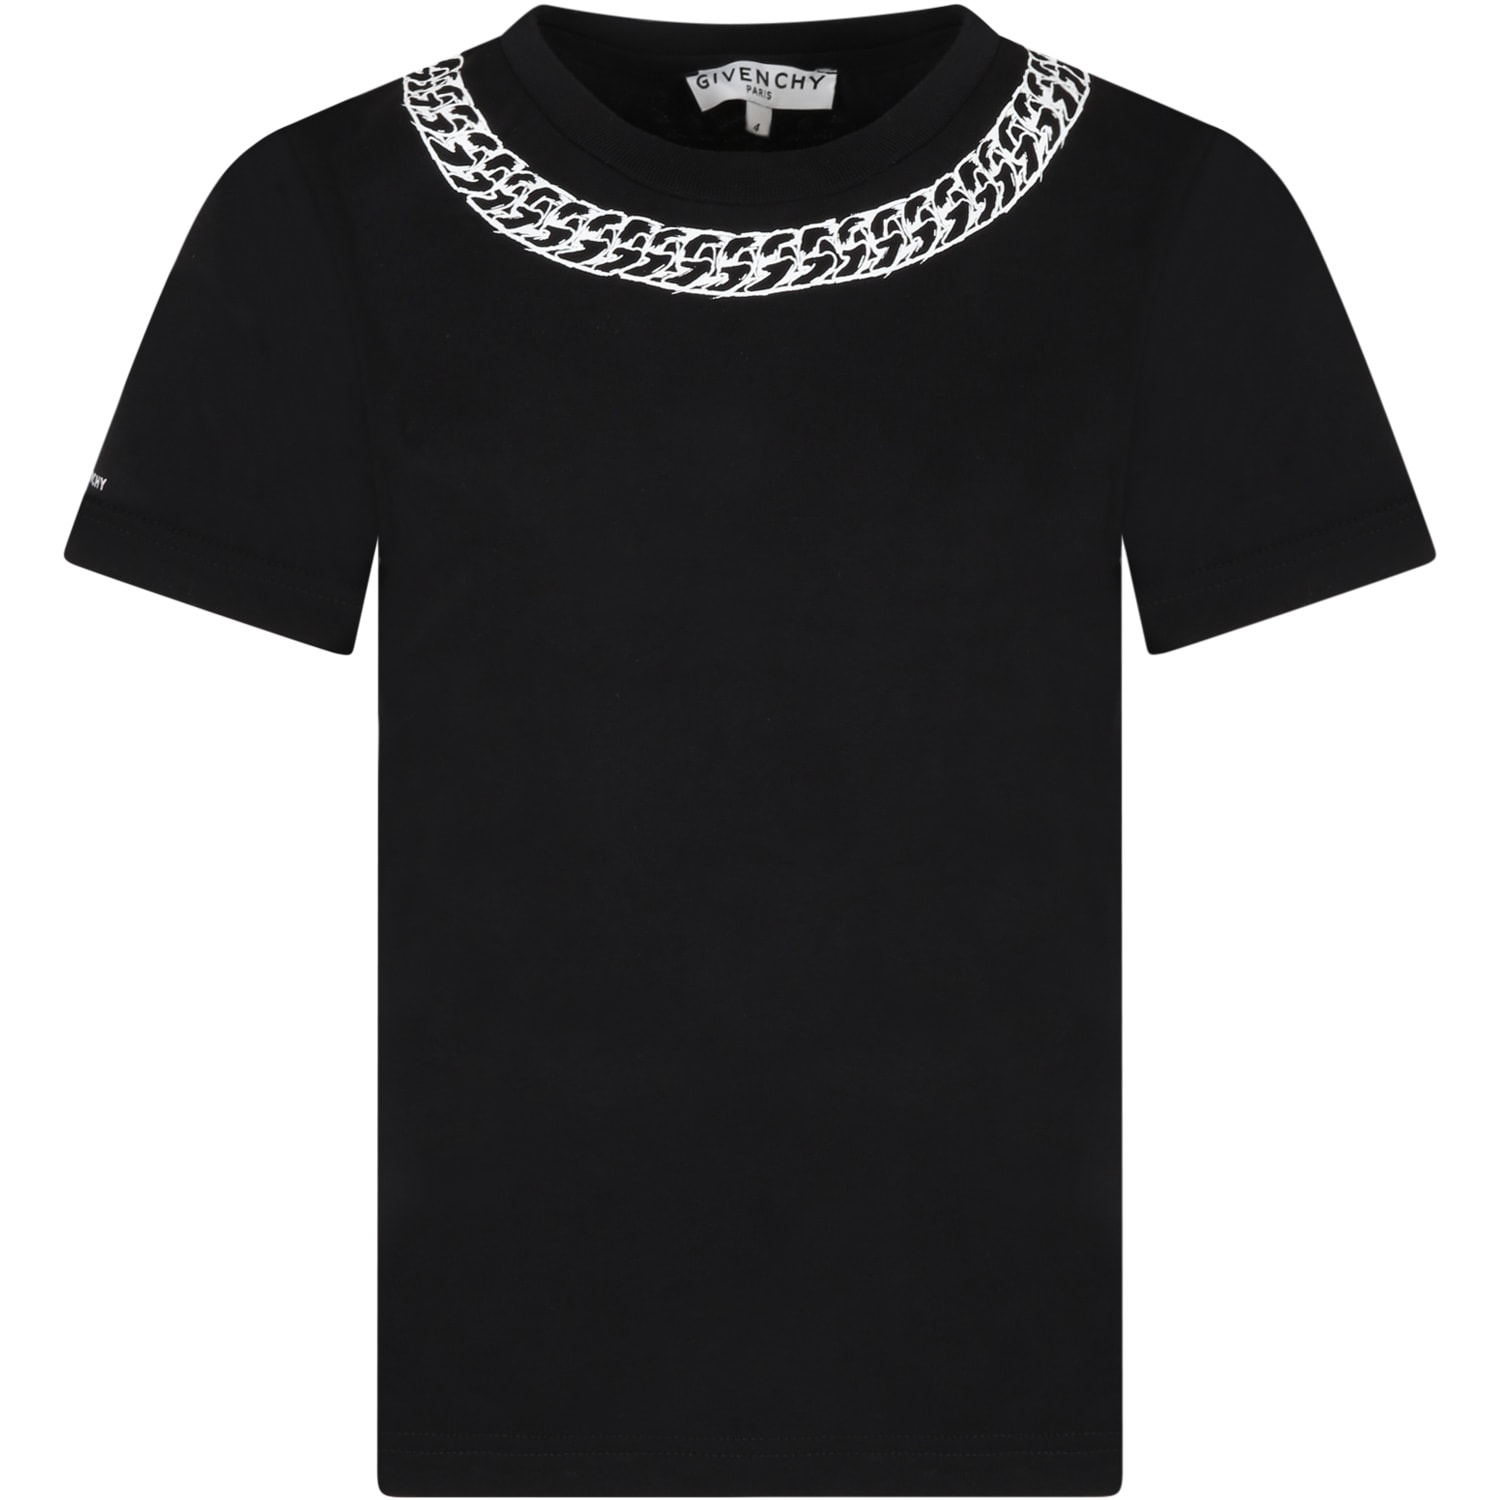 Givenchy Black T-shirt For Kids With Chain